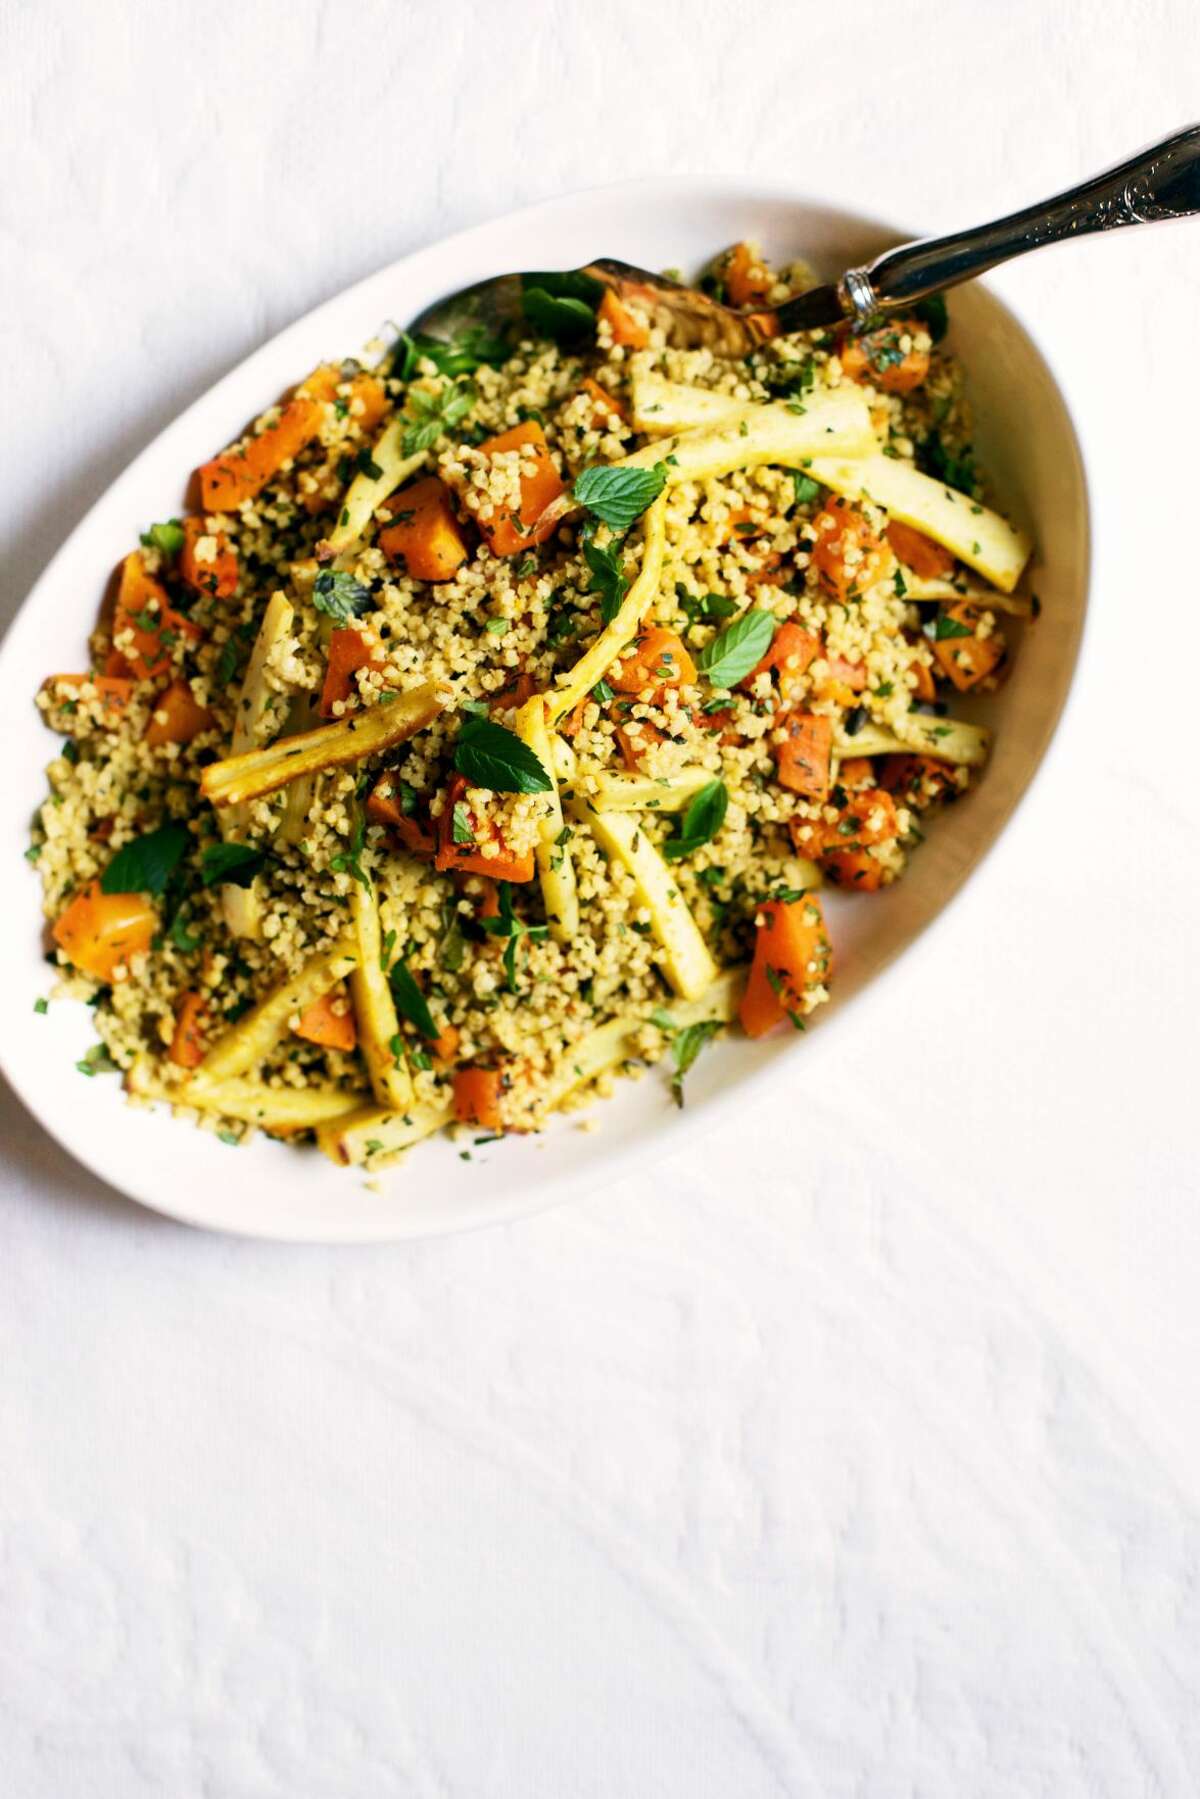 Millet couscous with roasted parsnips, pumpkin, and mint.